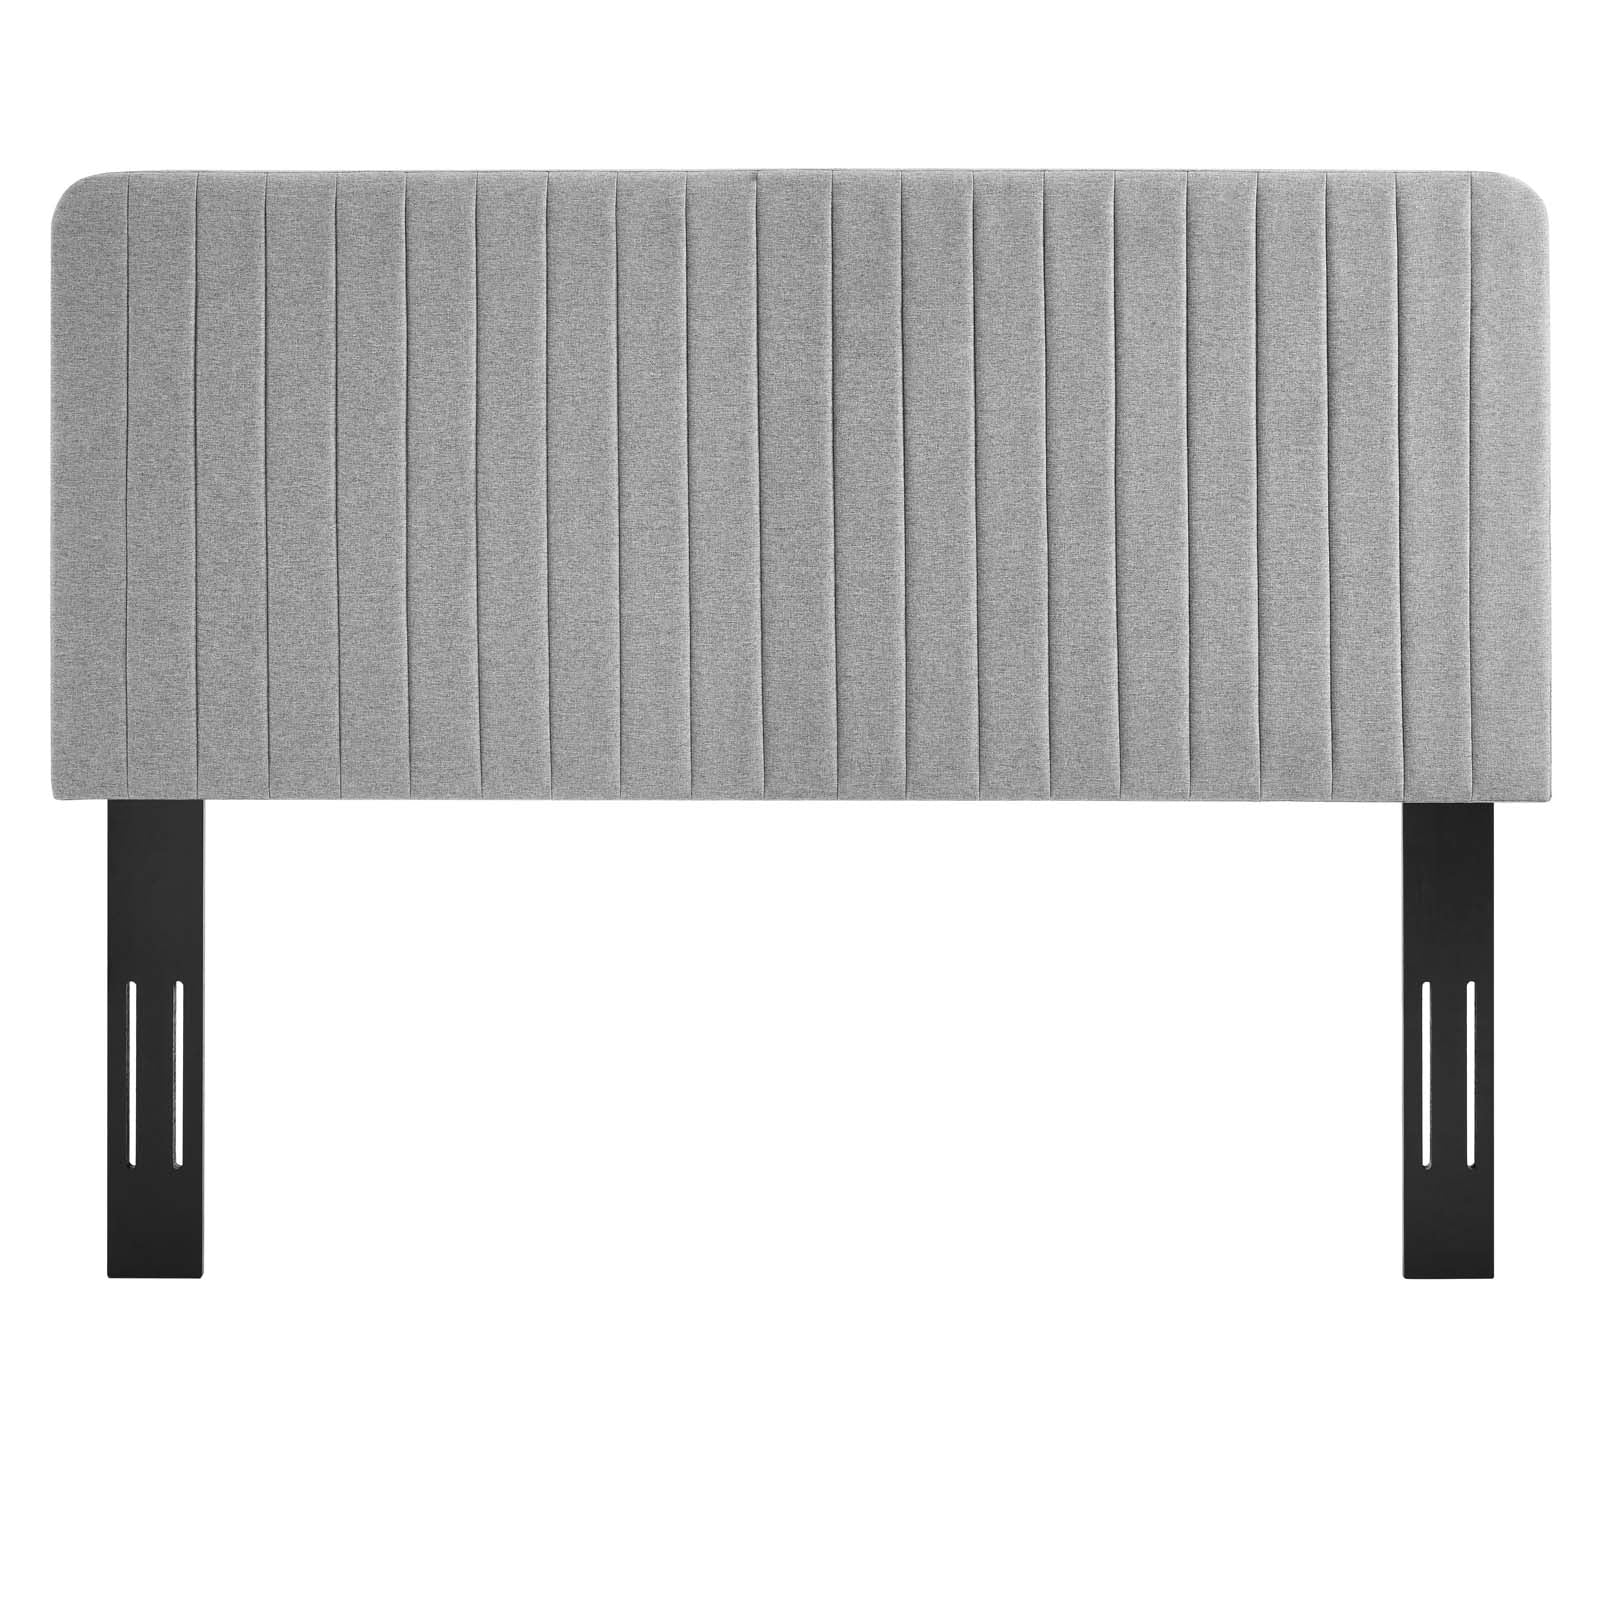 Modway Headboards - Milenna Channel Tufted Upholstered Fabric Full/Queen Headboard Light Gray